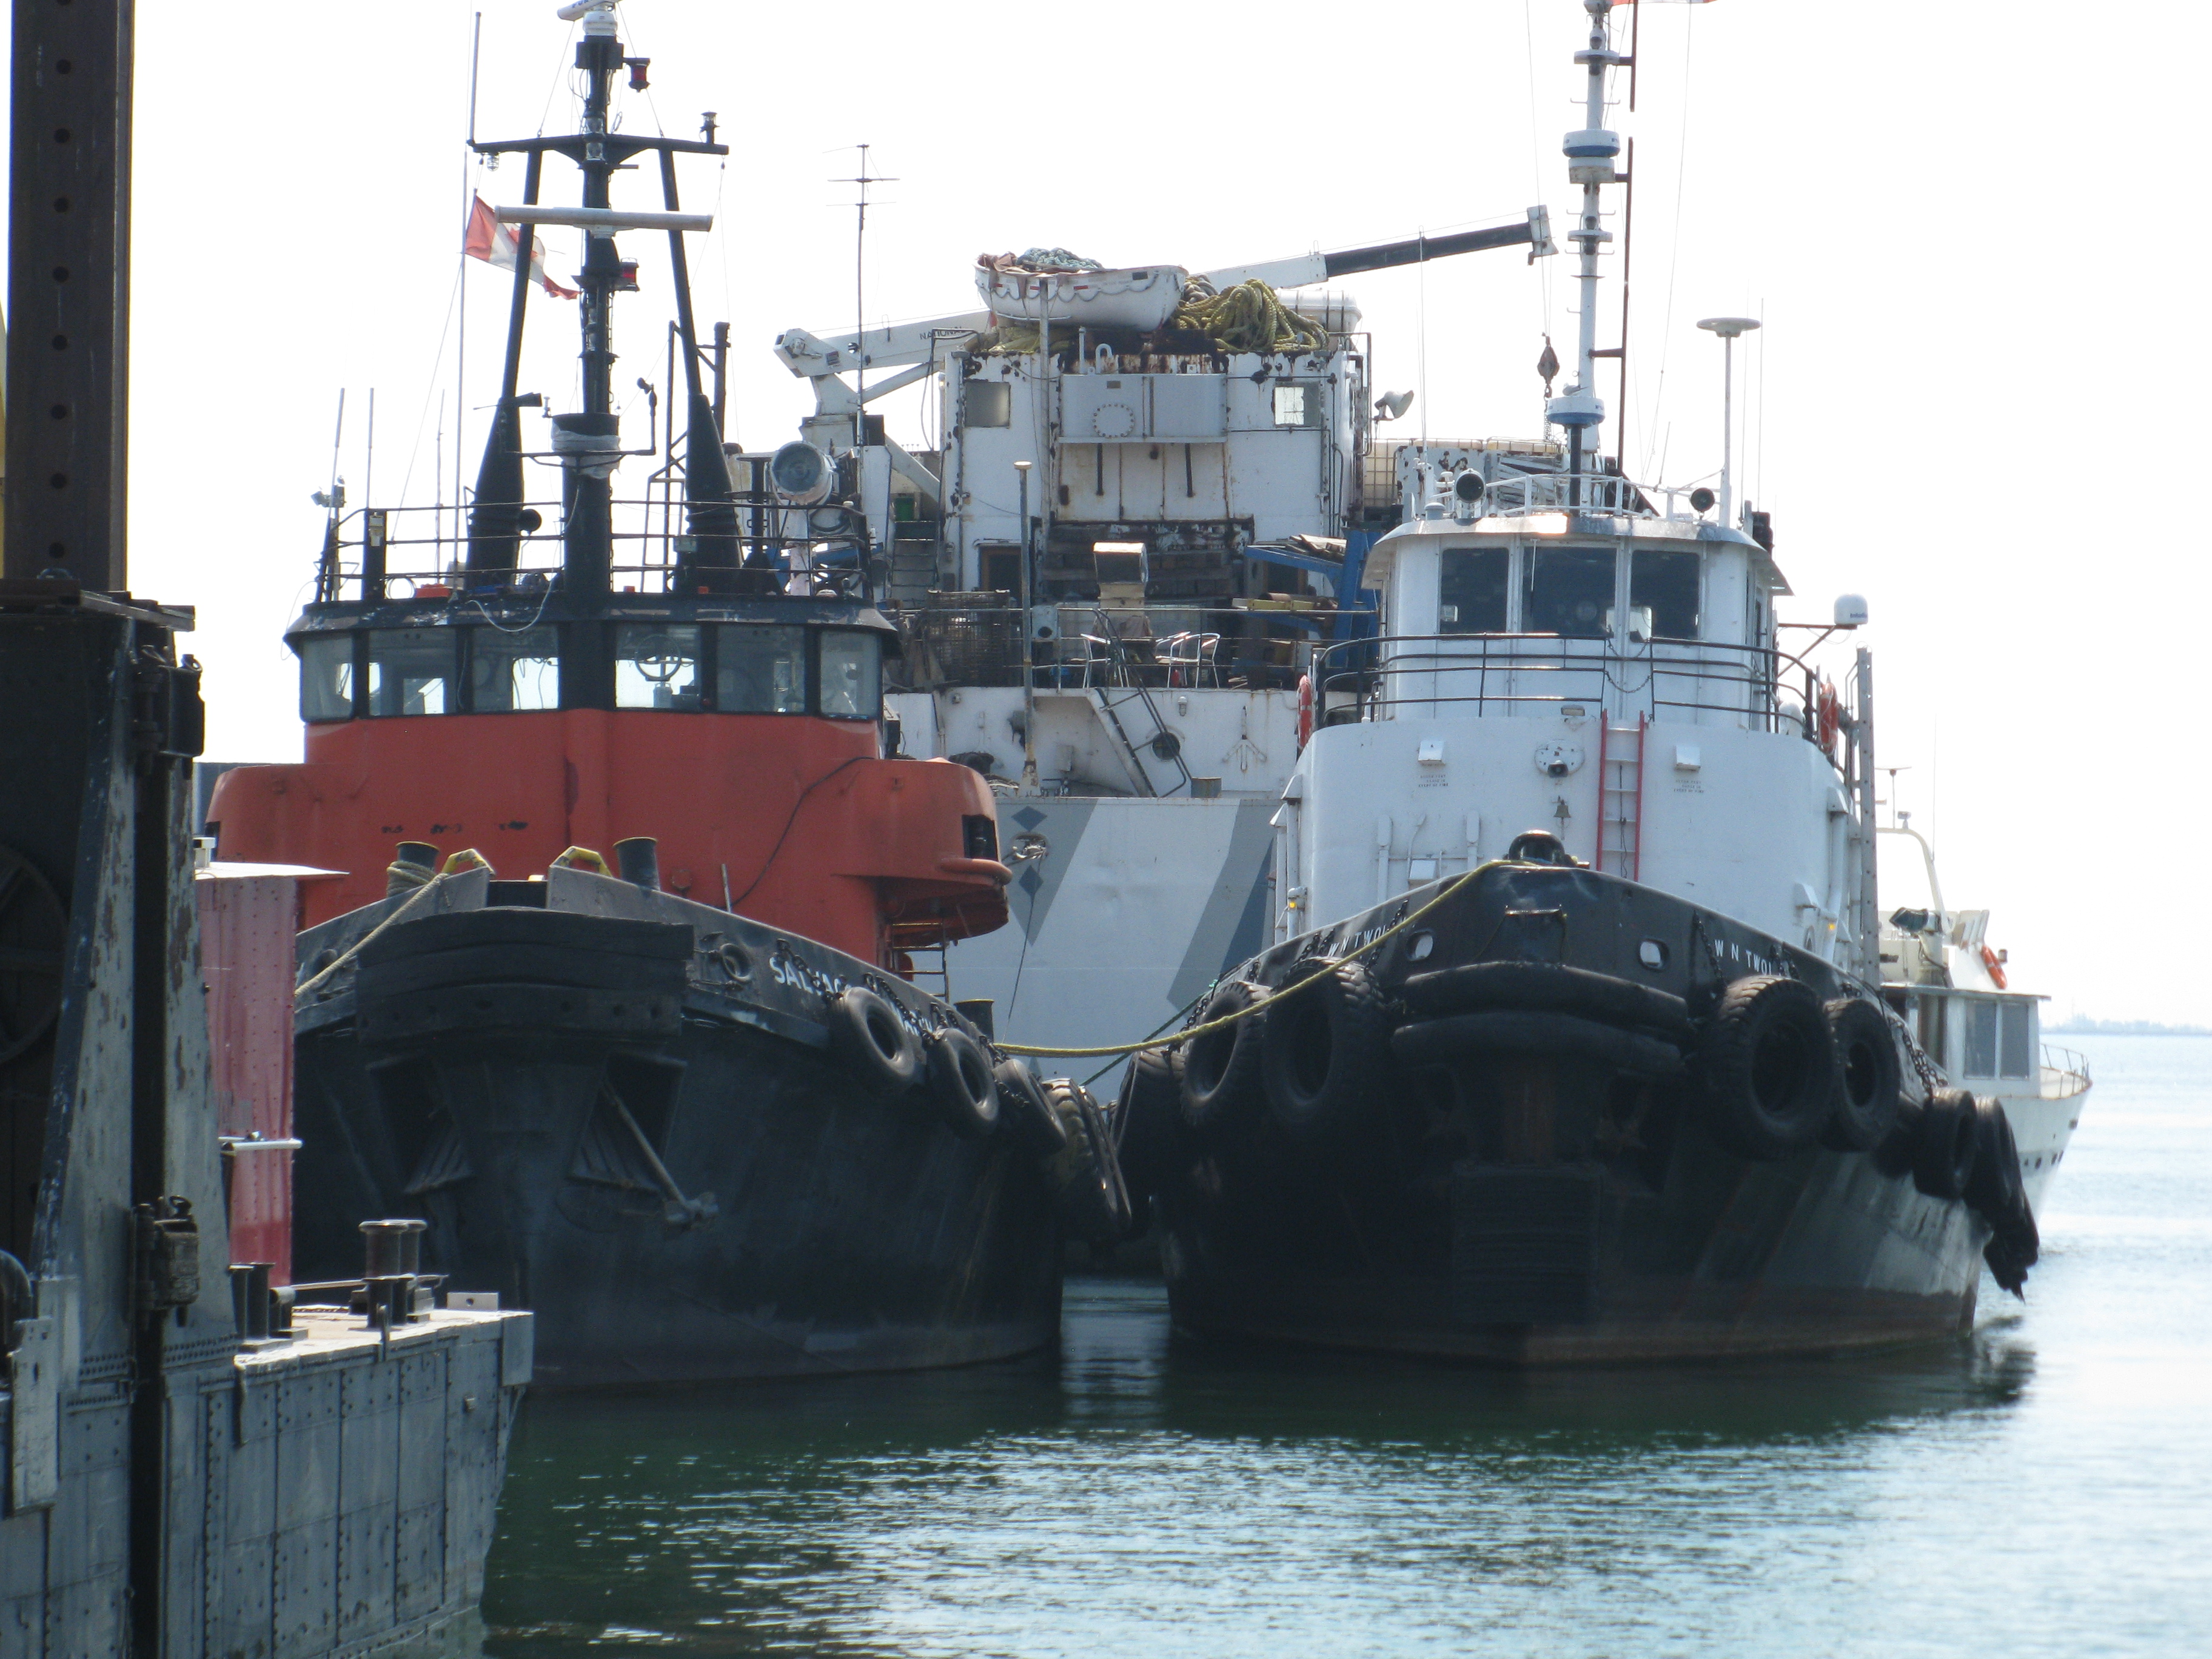 Two tugs in the keating channel, 2012 07 13 -a.jpg photo